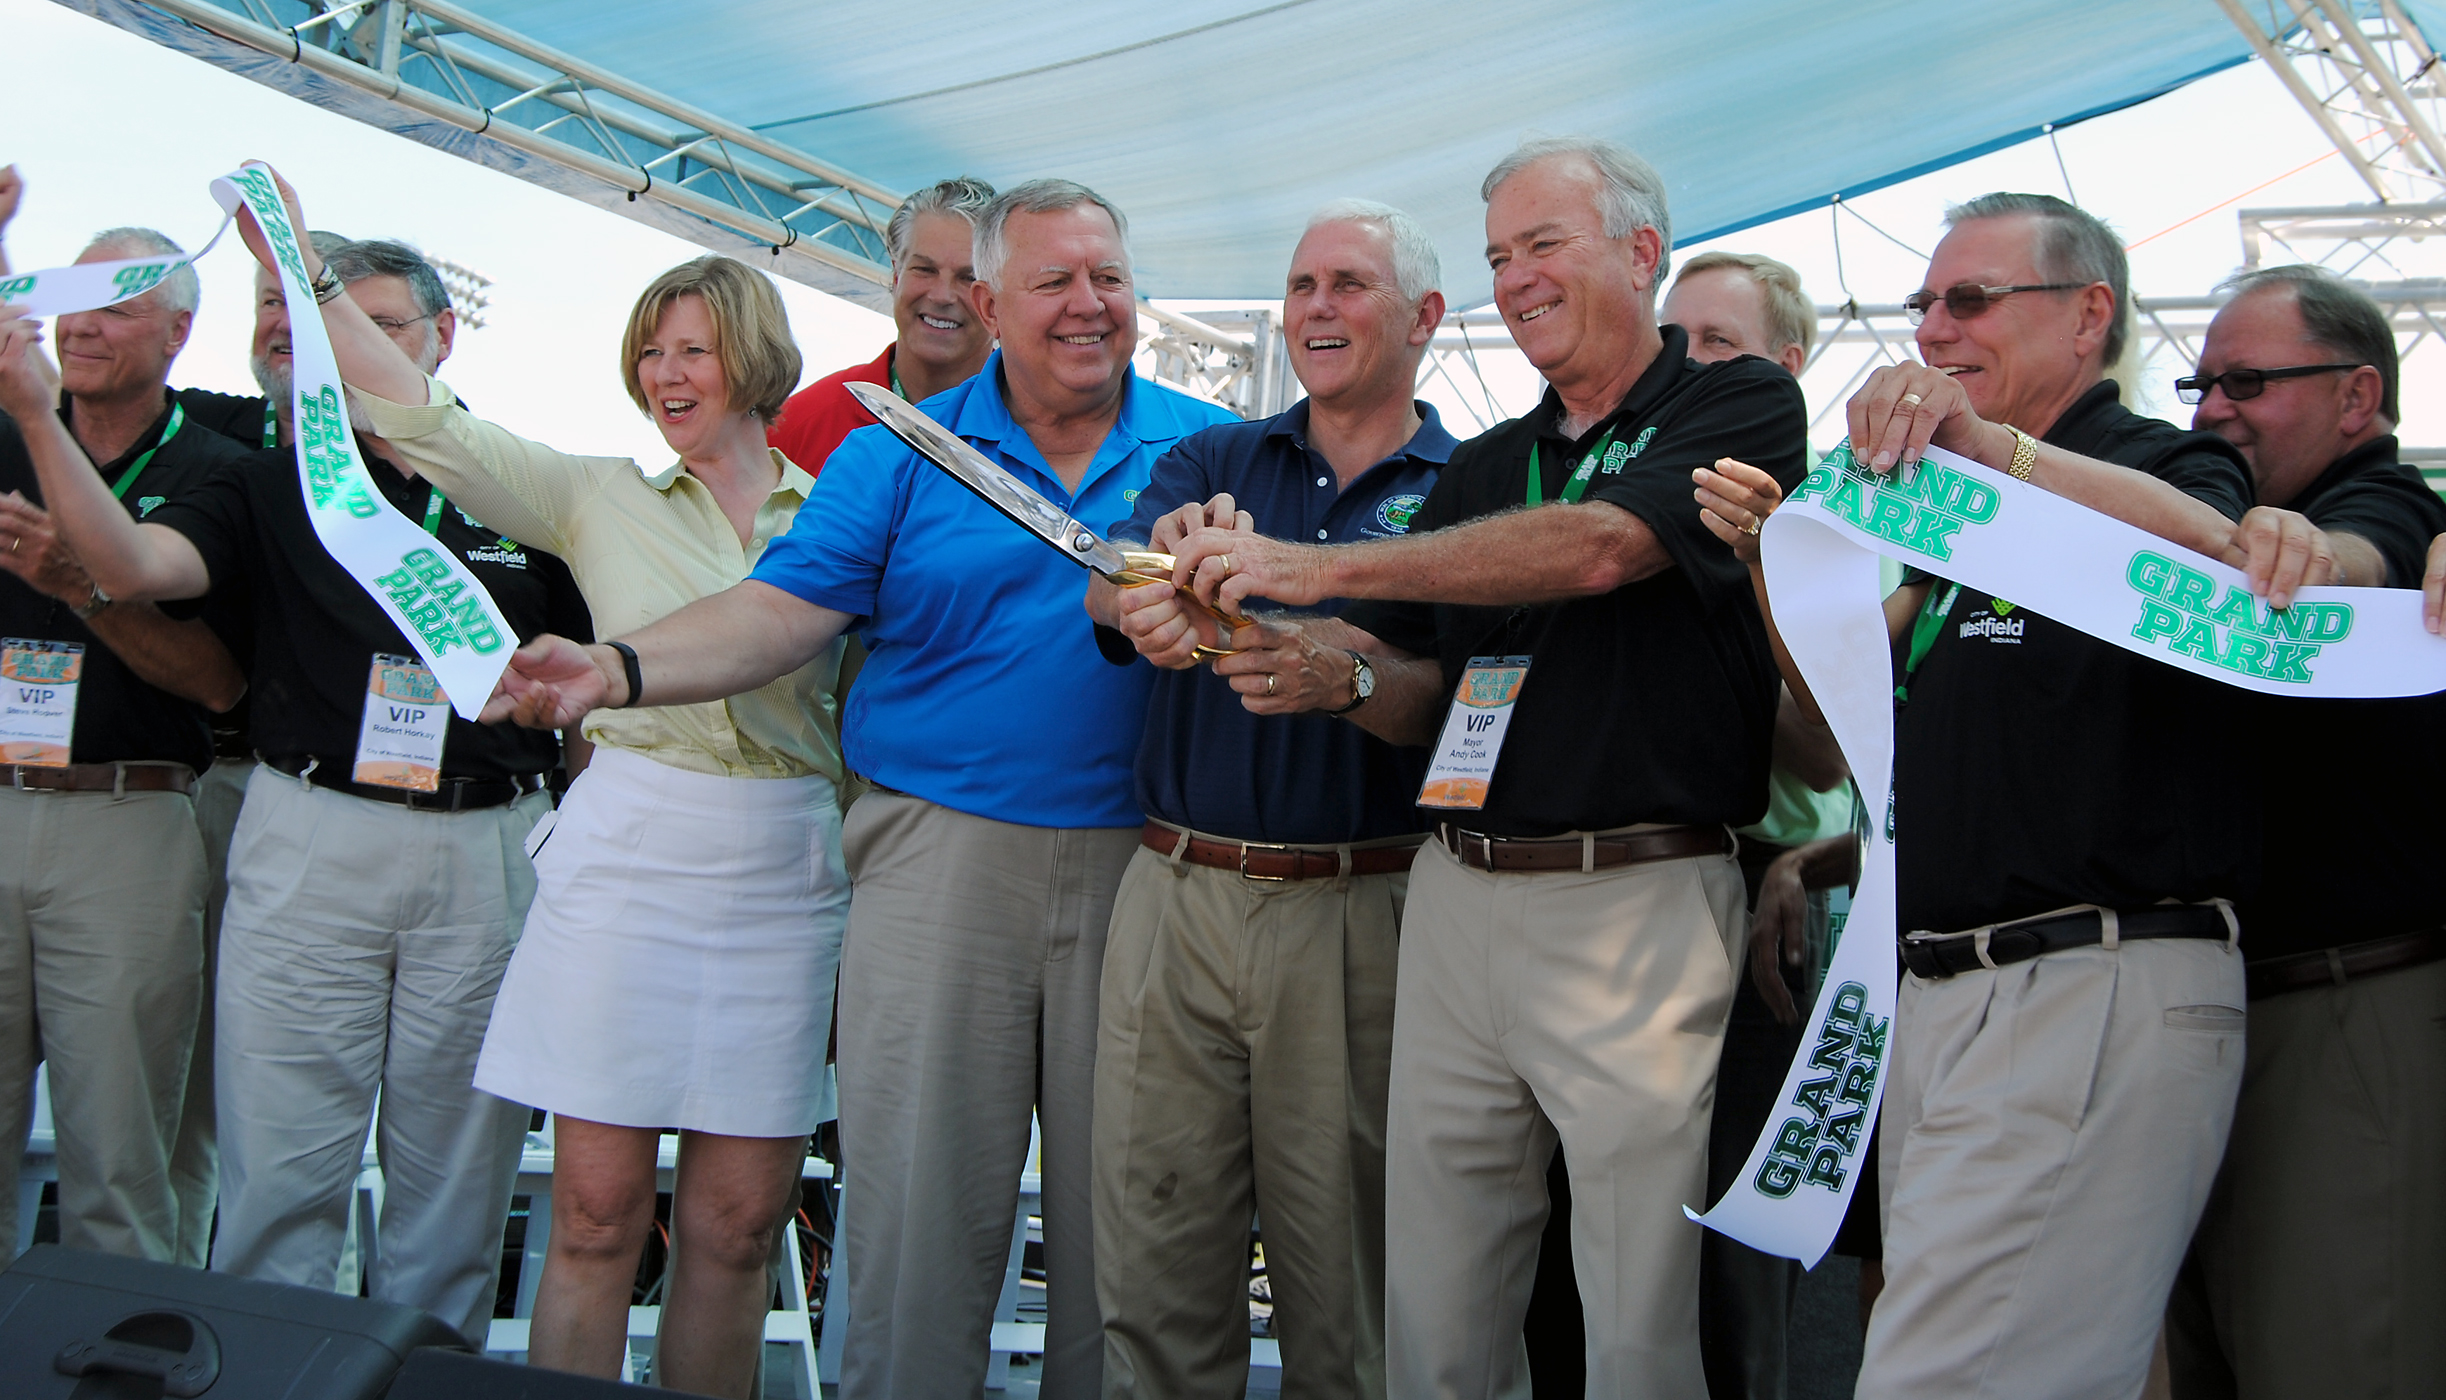 Members of the Westfield City Council surround U.S. Rep Susan Brooks (R-Ind.), developer Steve Henke, Gov. Mike Pence and Mayor Andy Cook at the ribbon cutting on June 21. (Photo by Robert Herrington)